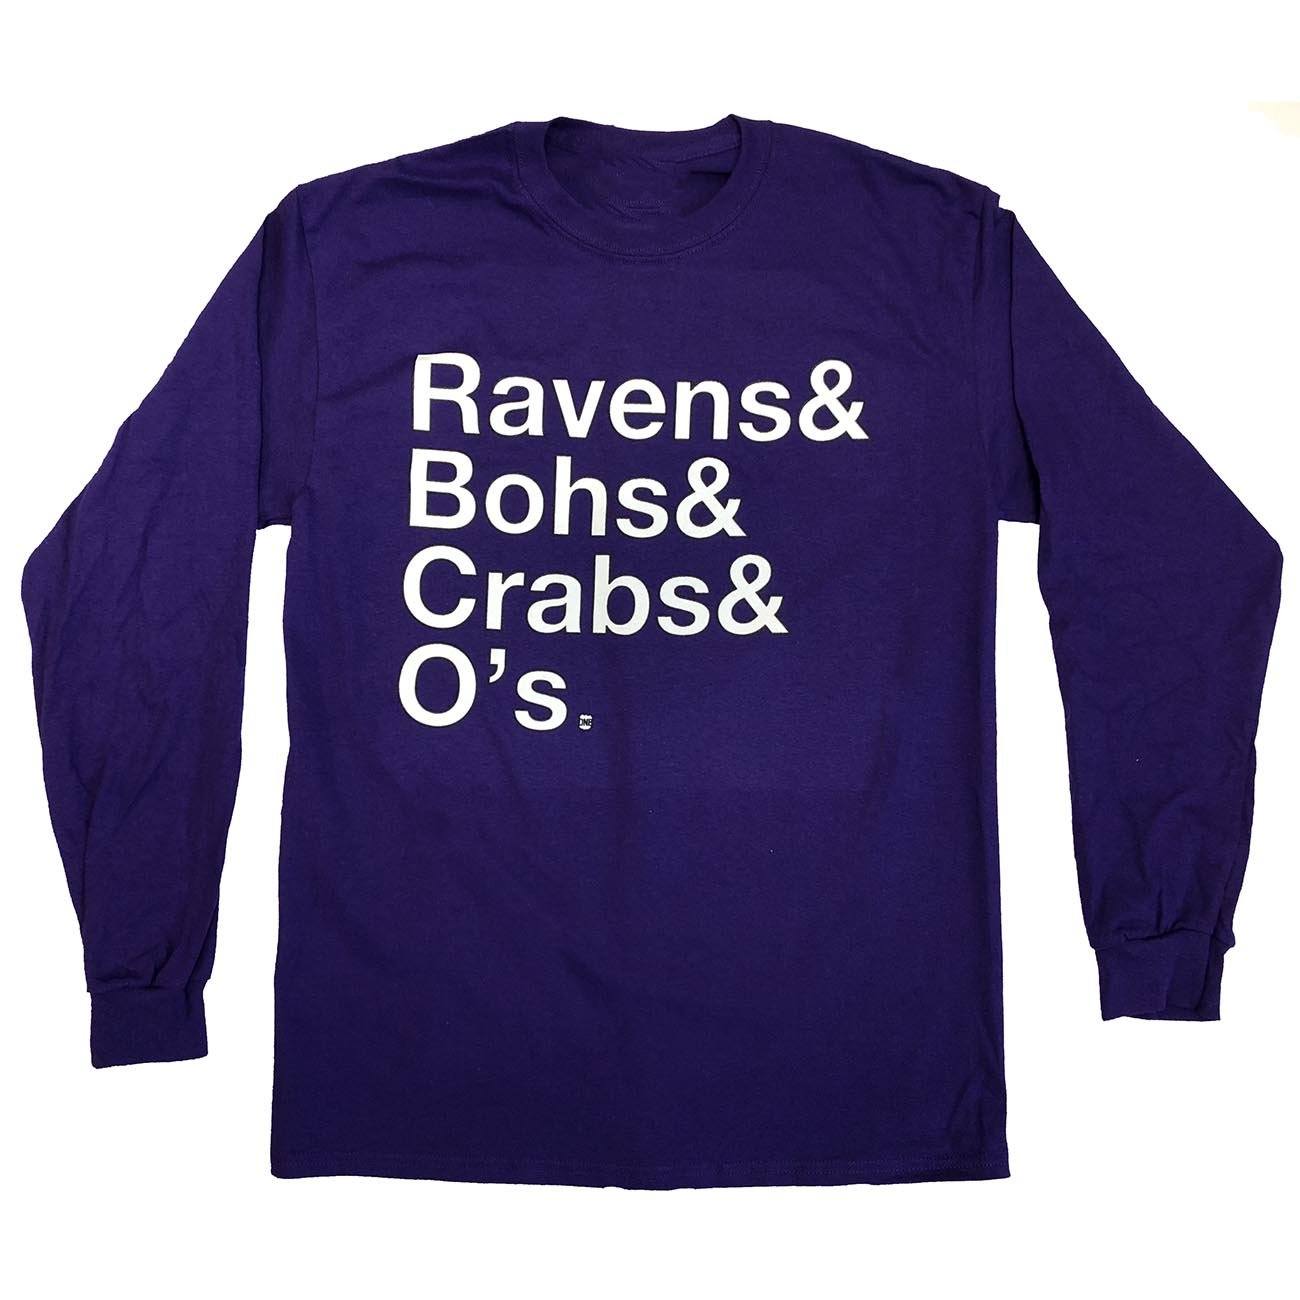 Ravens & Bohs & Crabs & O's Helvetica (Purple) / Long Sleeve Shirt - Route One Apparel